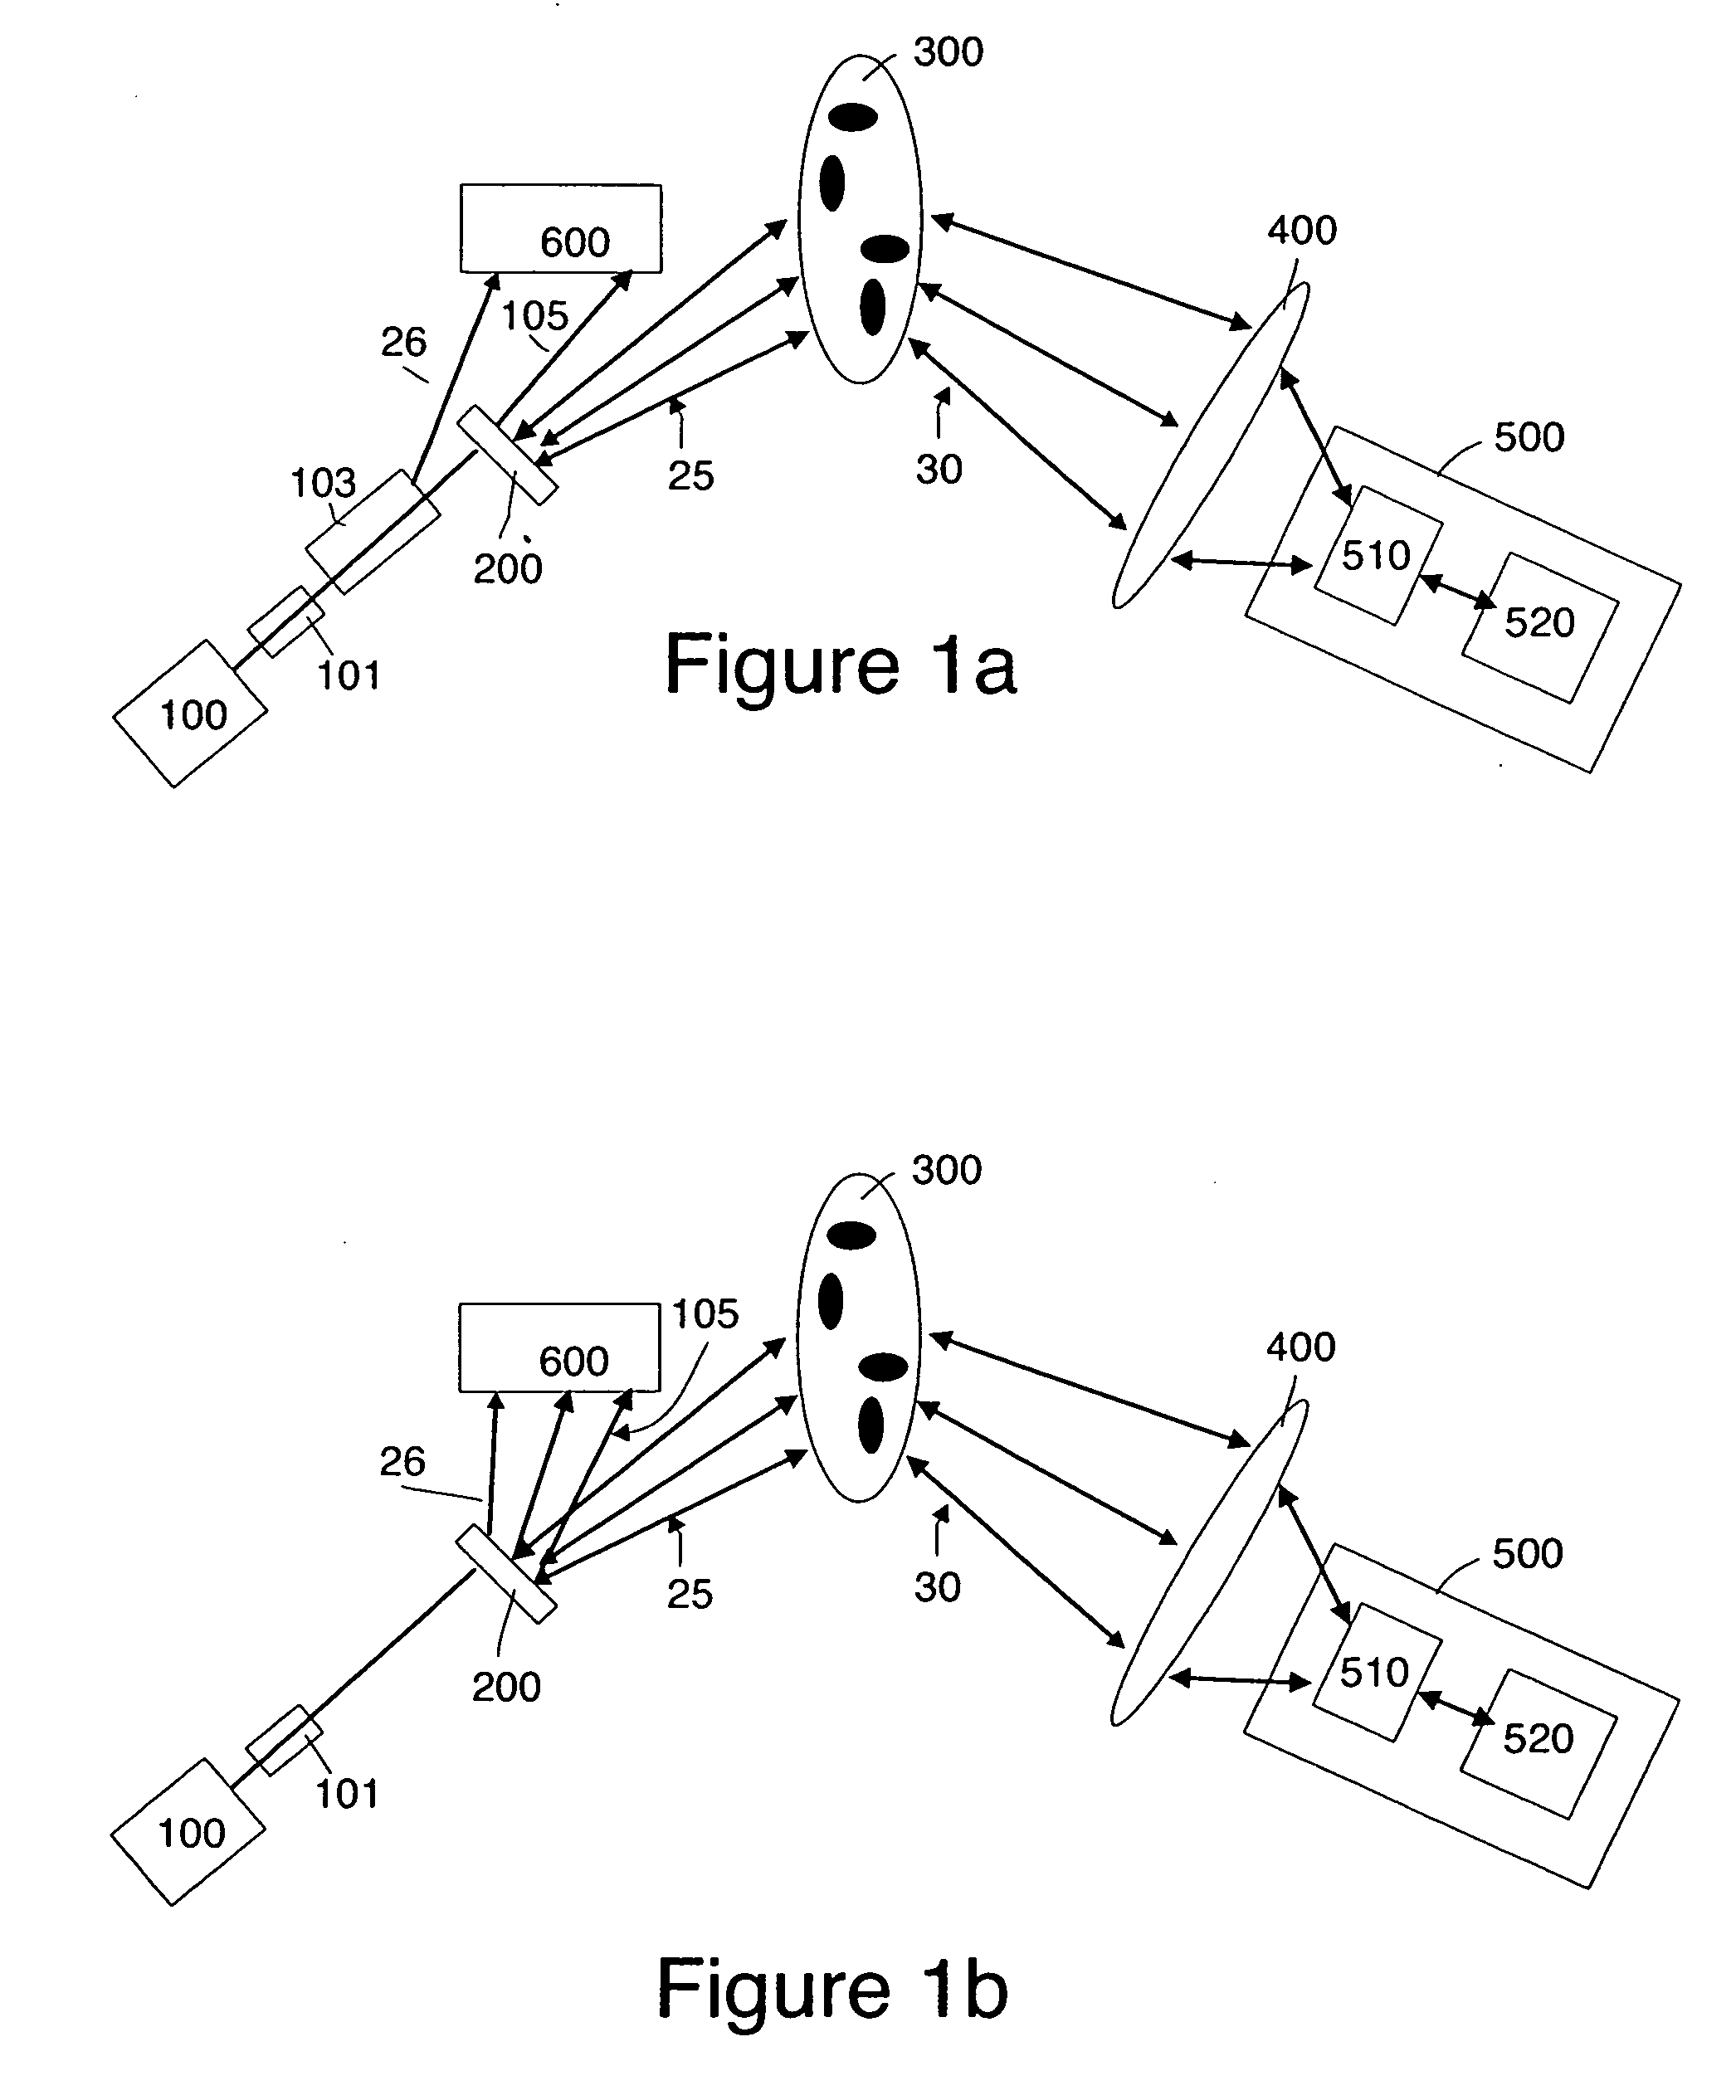 Optical remote sensor with differential Doppler motion compensation